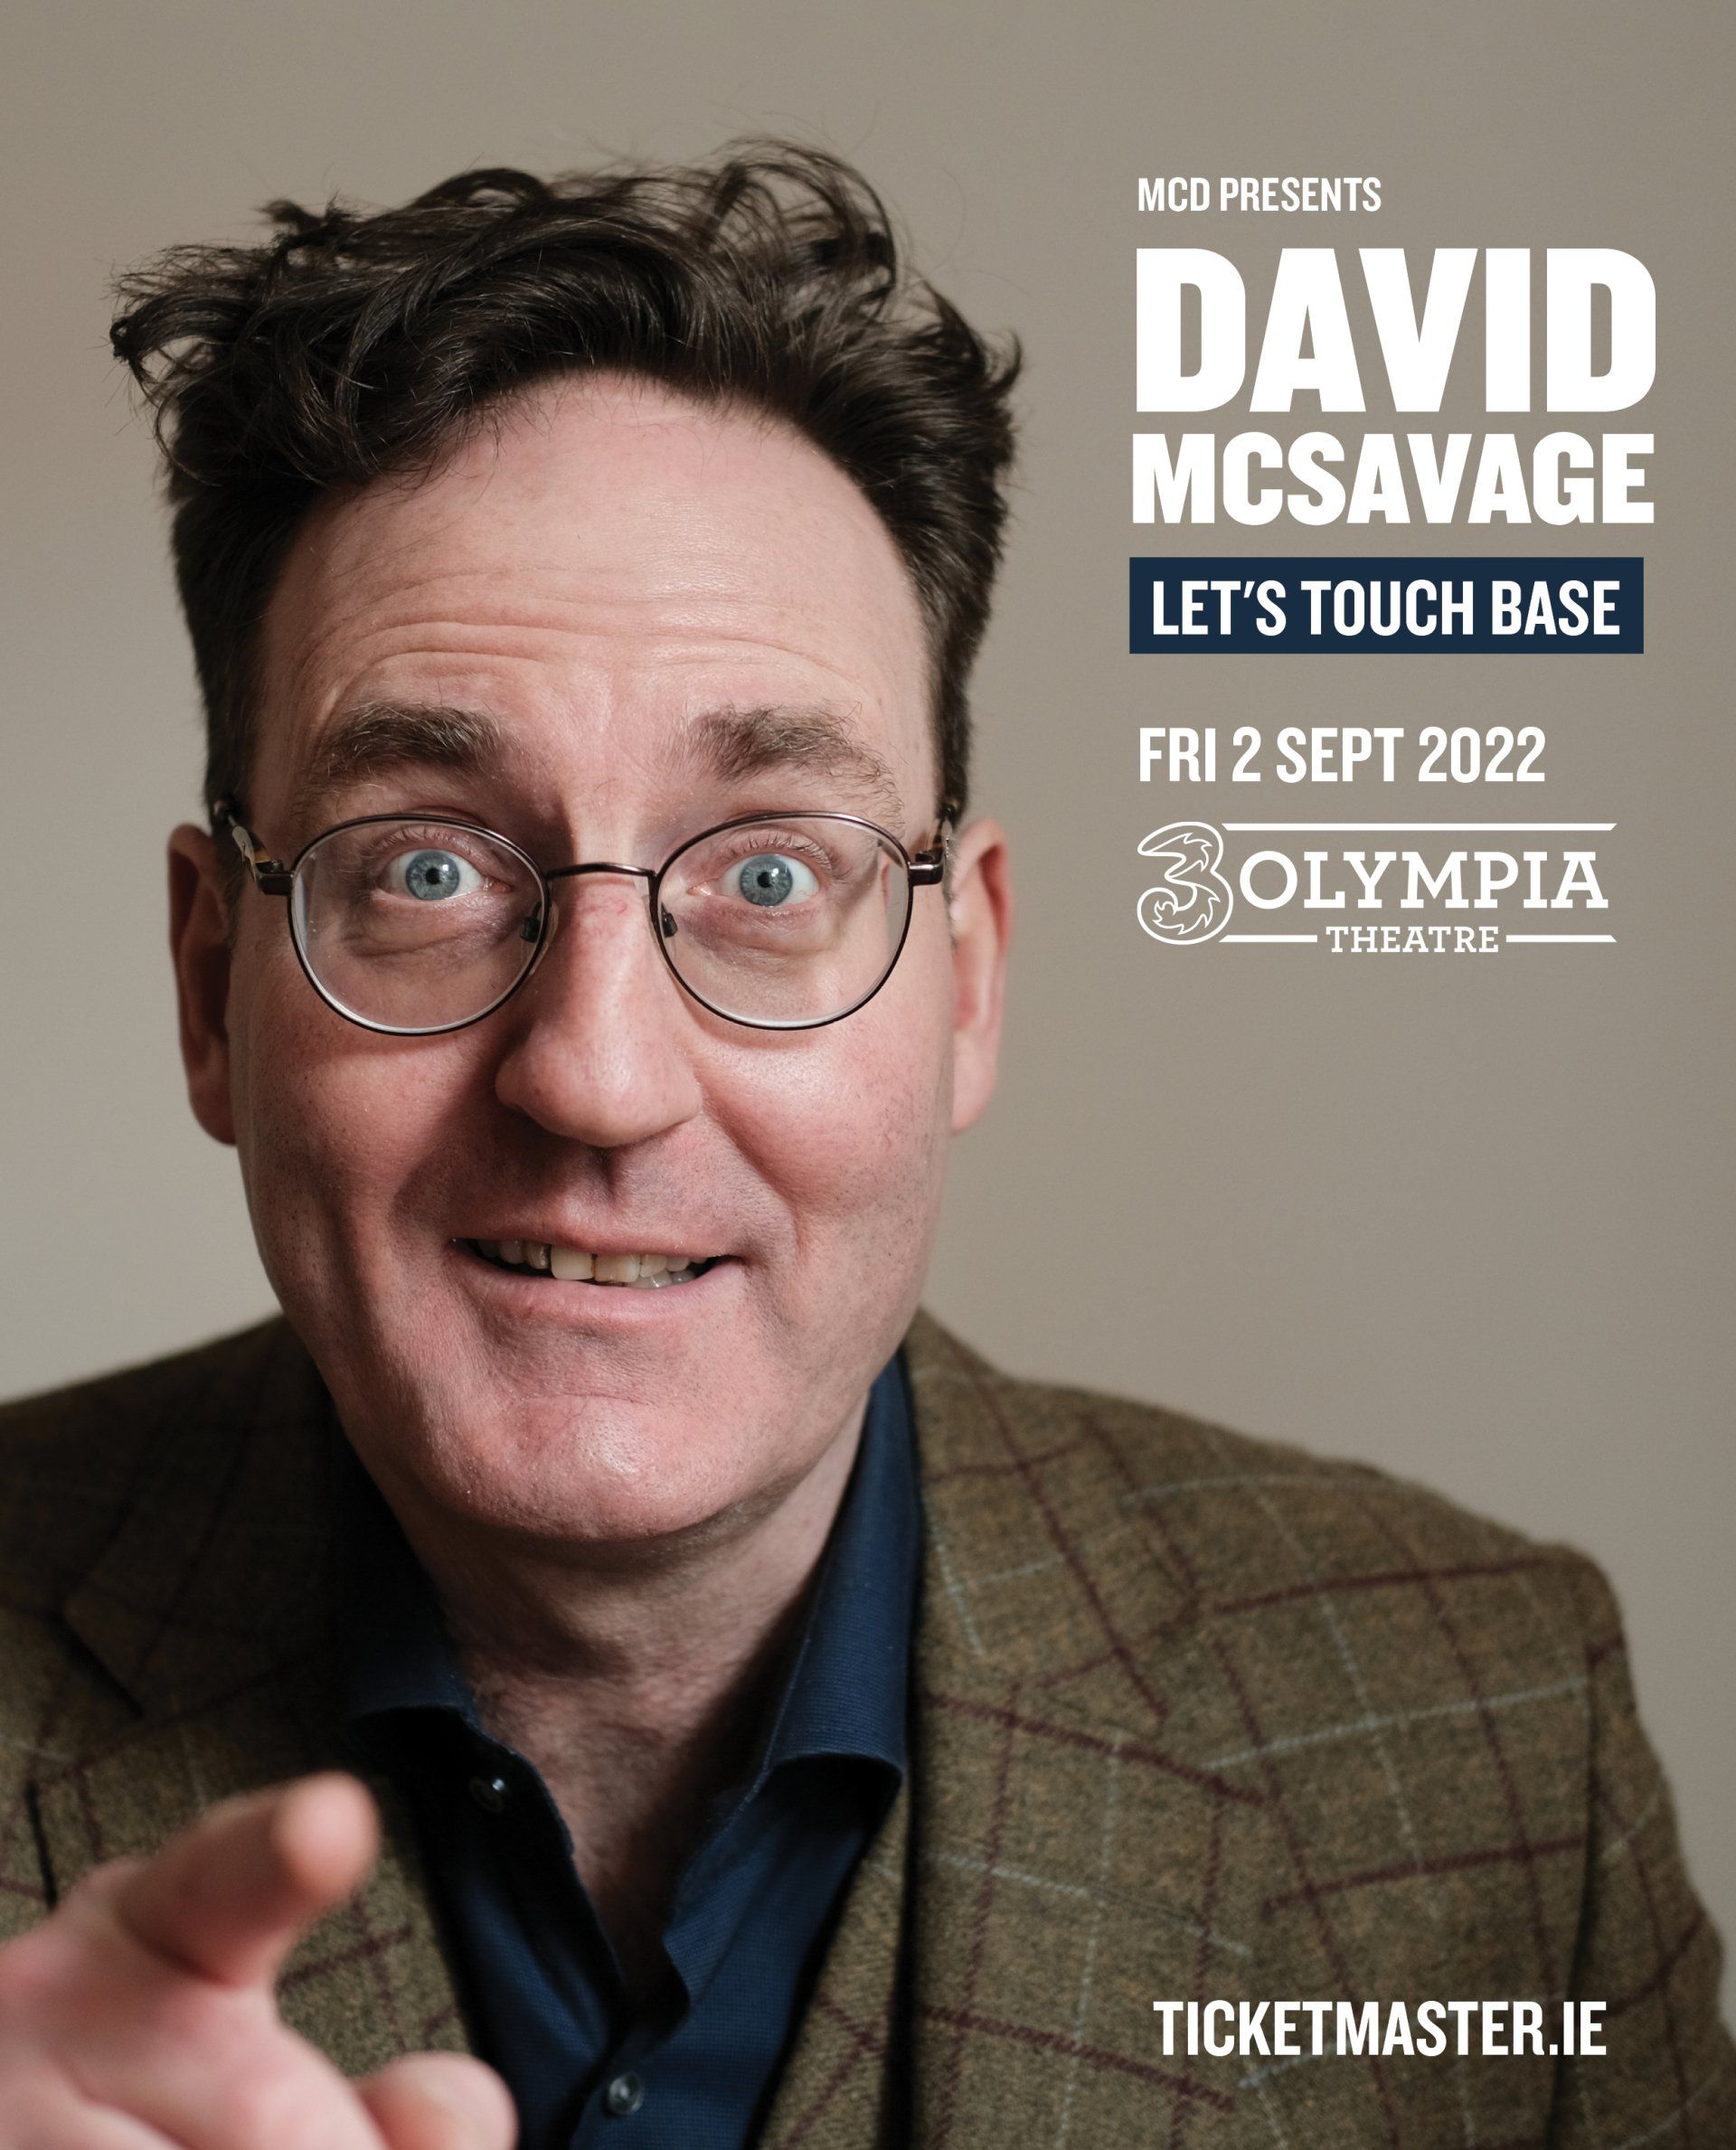 David McSavage   New stand-up show  Let’s Touch Base